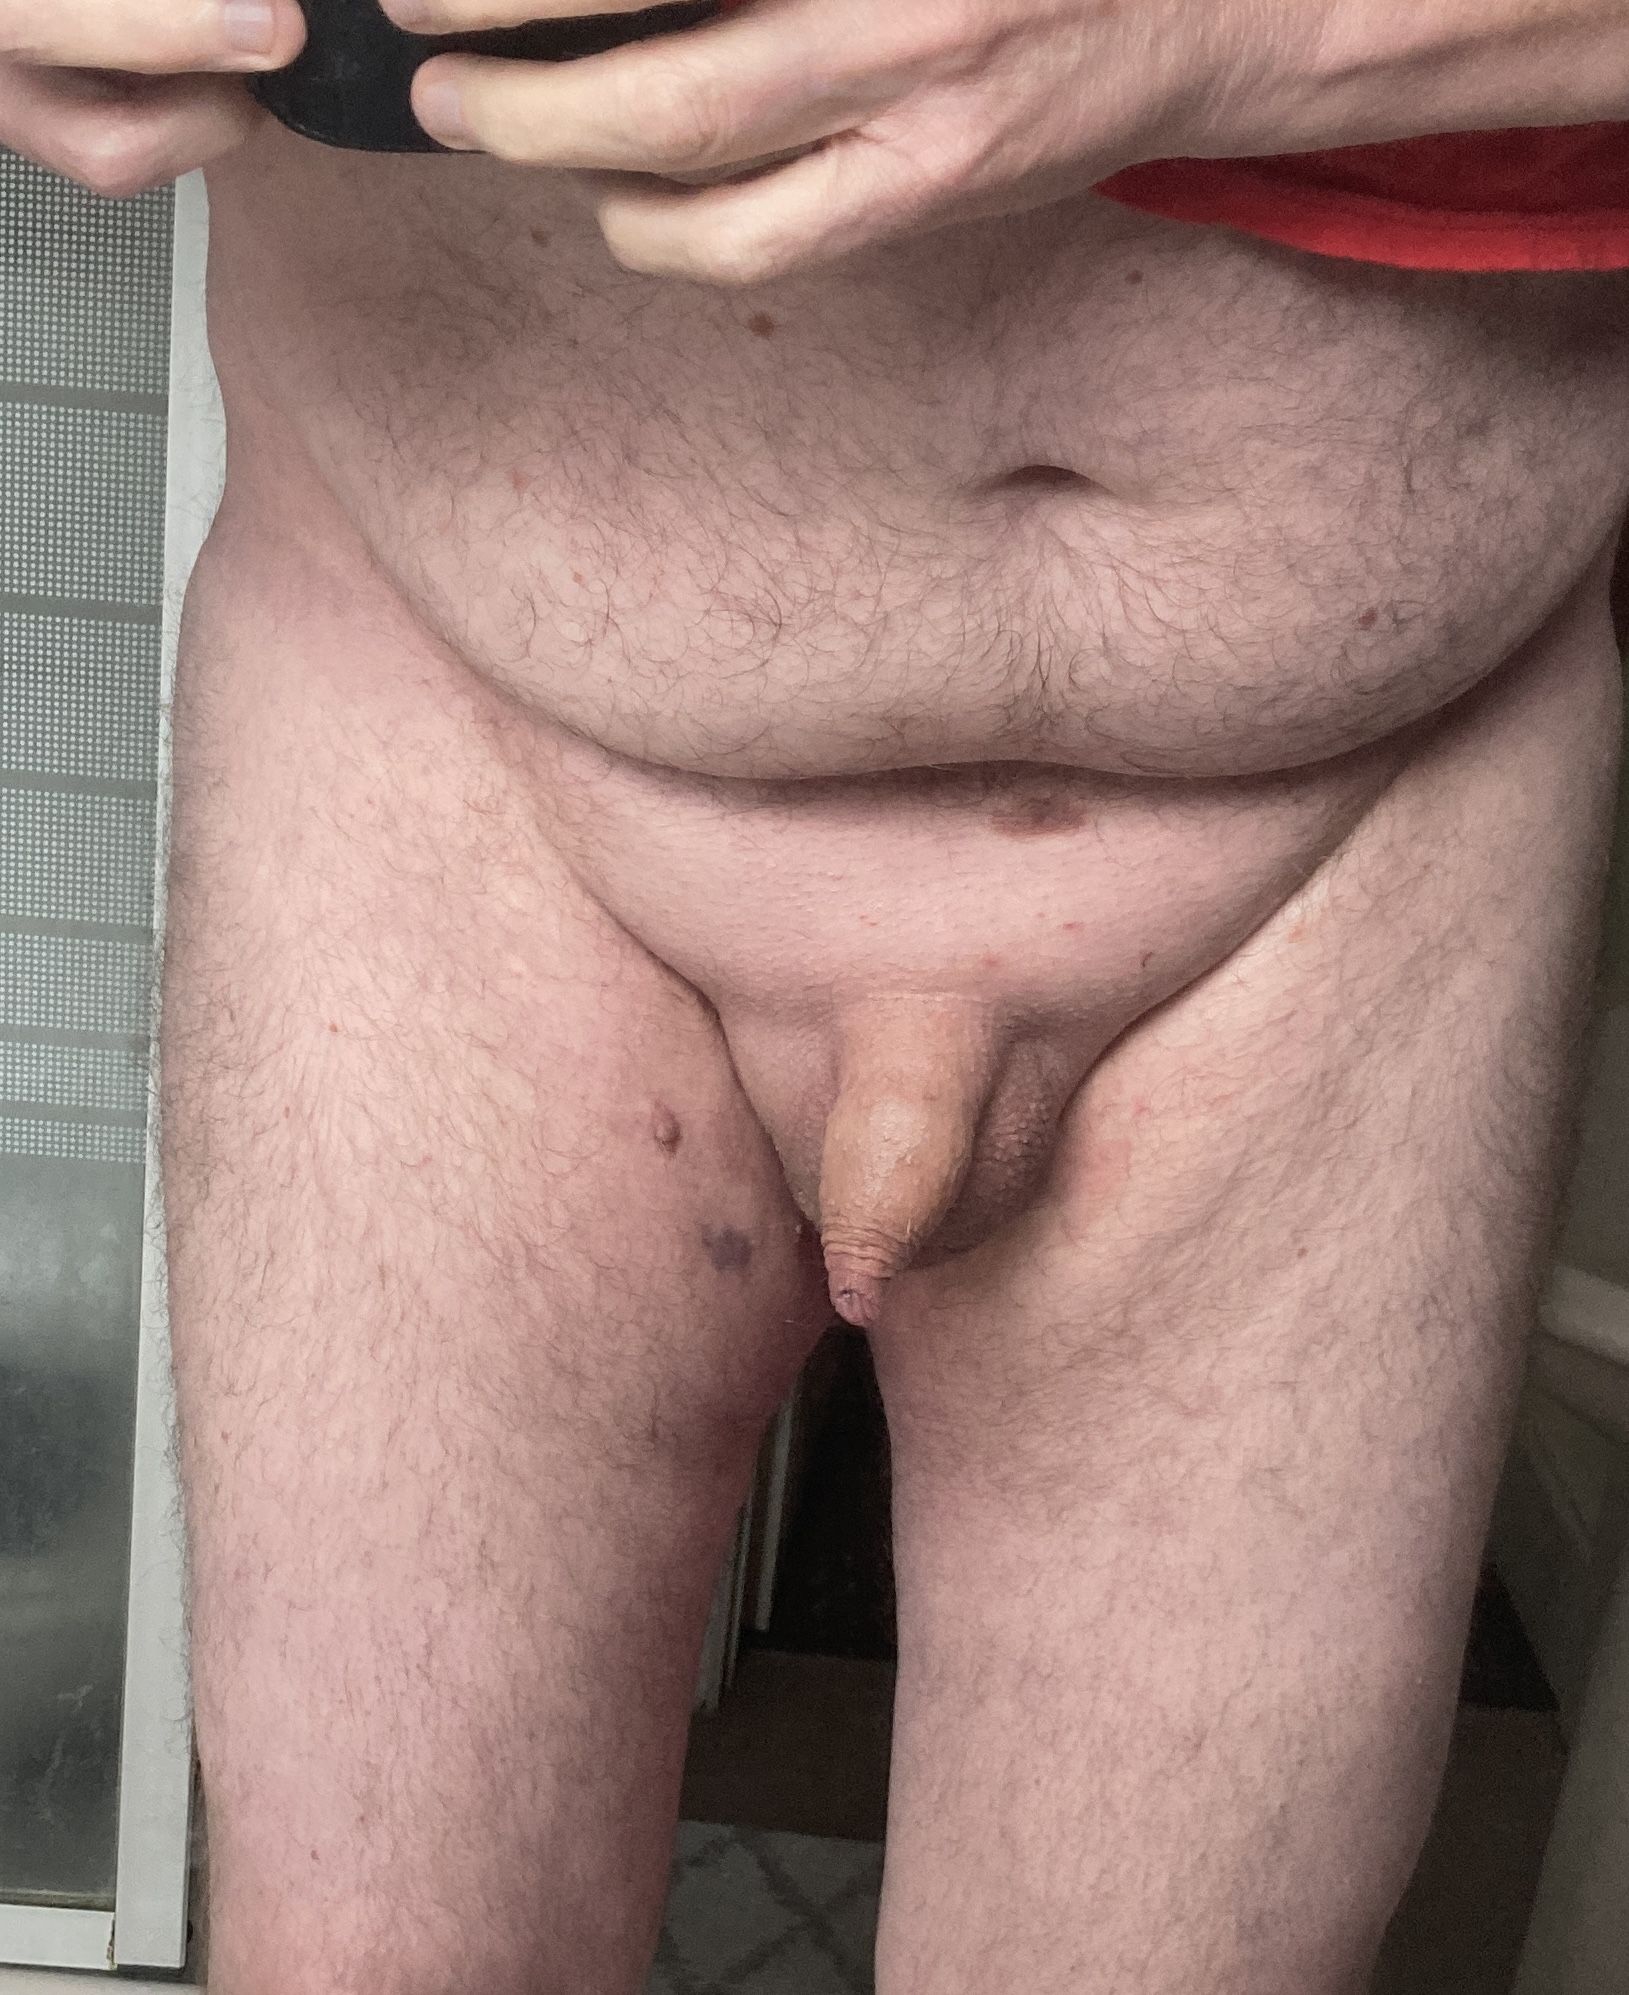 Shaved pubes